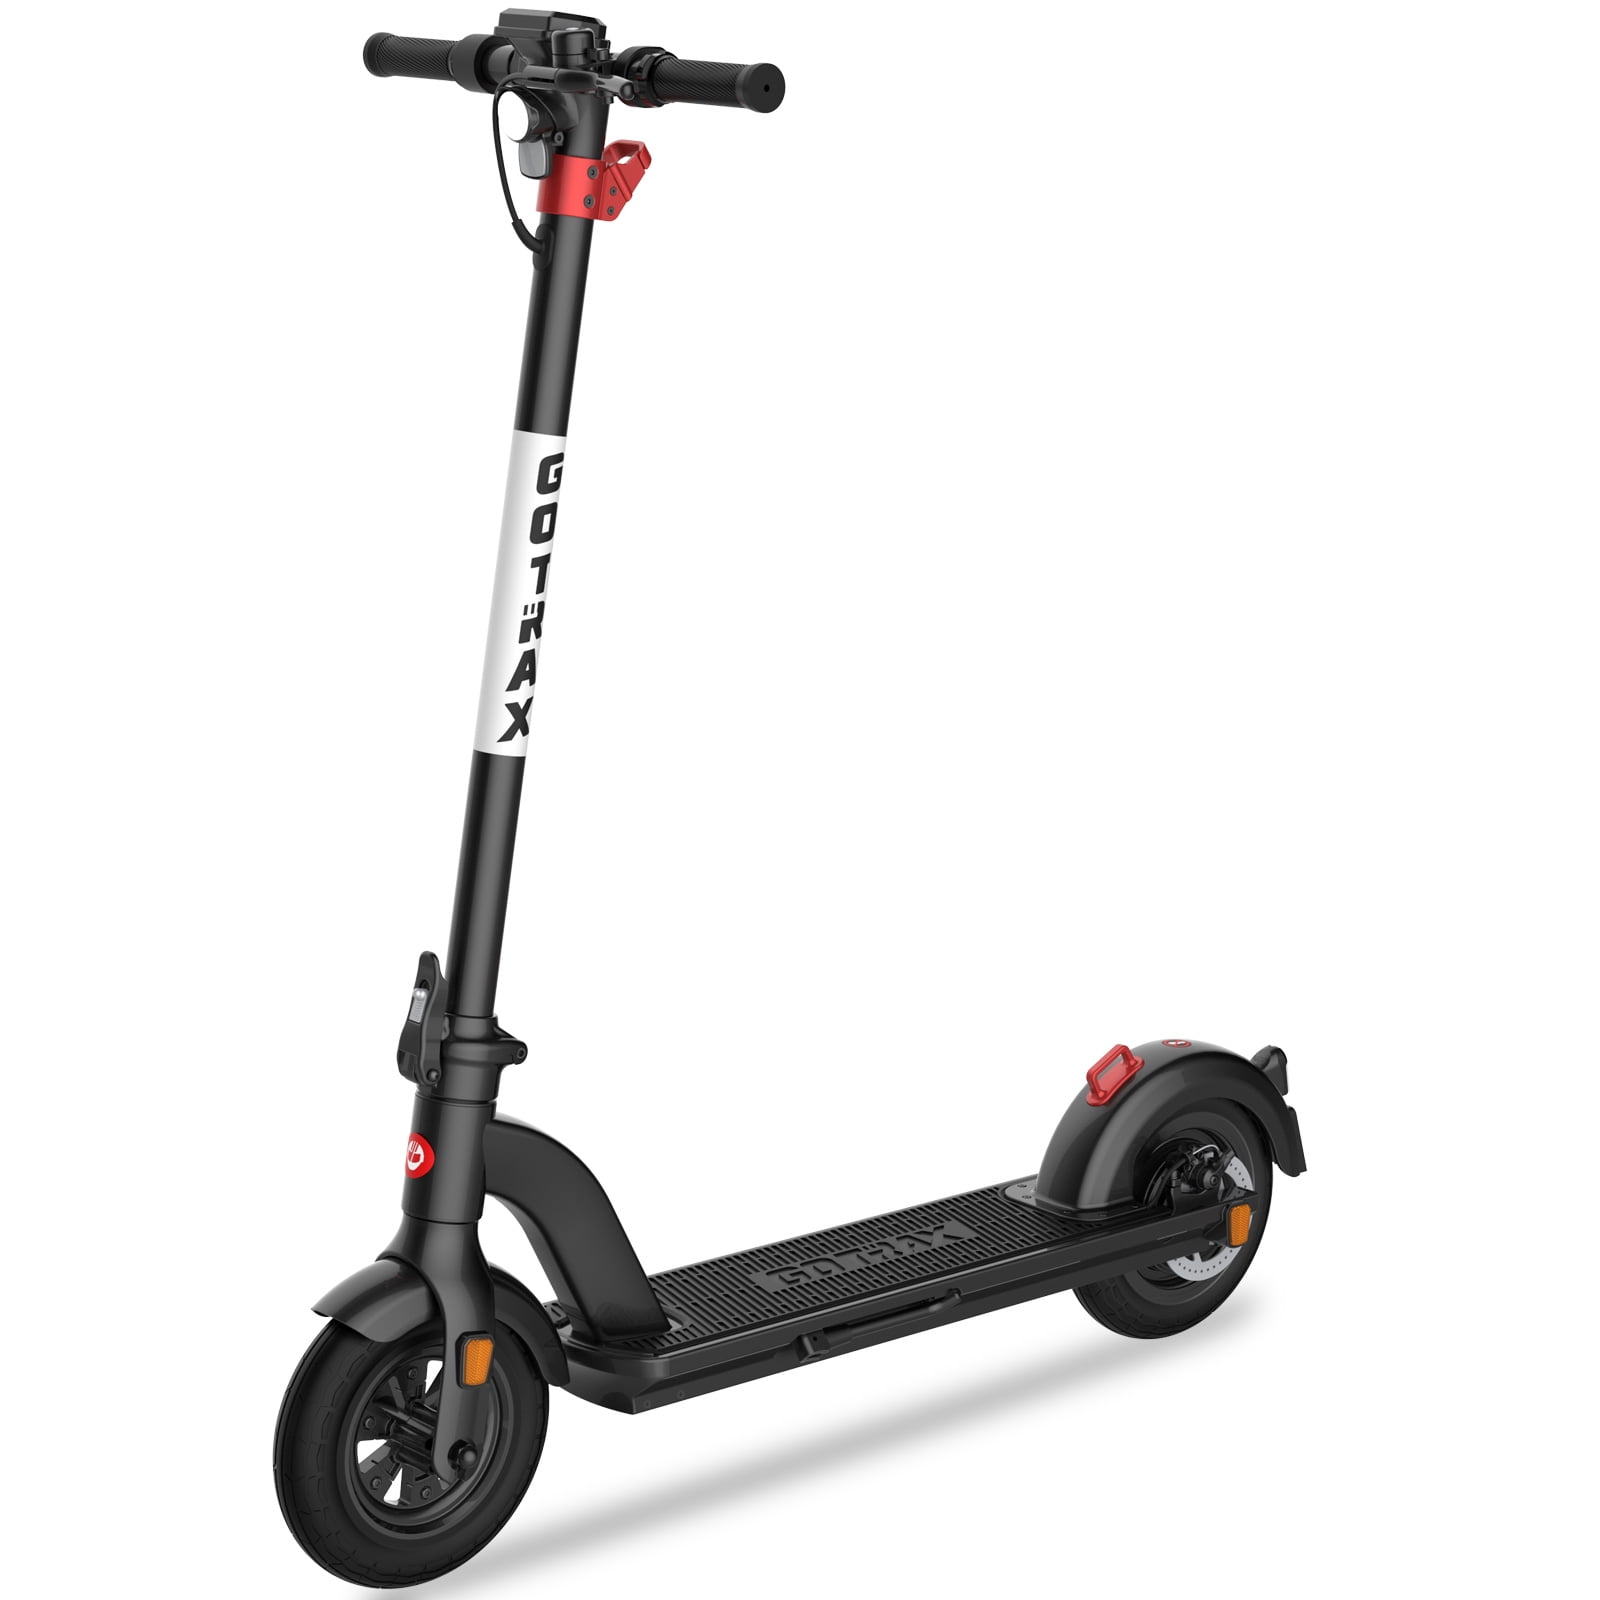 12 MPH & 7 Miles Range E Kick Scooters for Kids Teens Gotrax Vibe Electric Kick Scooter 6.5 Foldable Commuting Scooter for Kids 9-15 Boys and Girls